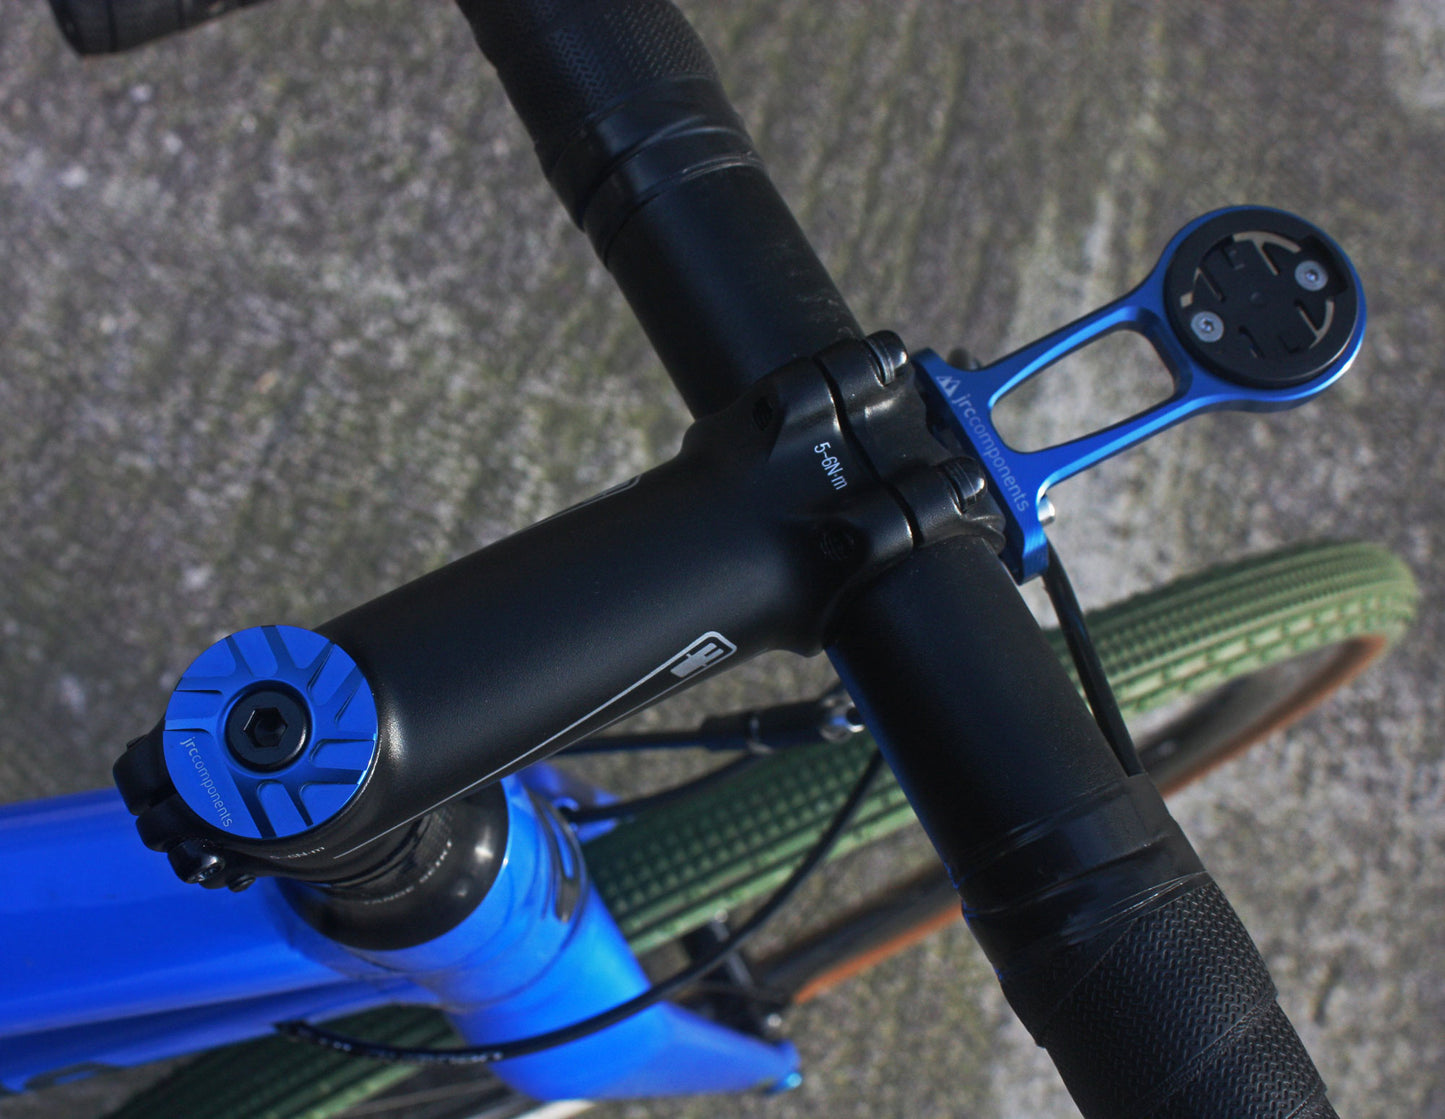 Blue, lightweight, aluminium Ahead stem top cap with sleek pathway design, fitted to bicycle